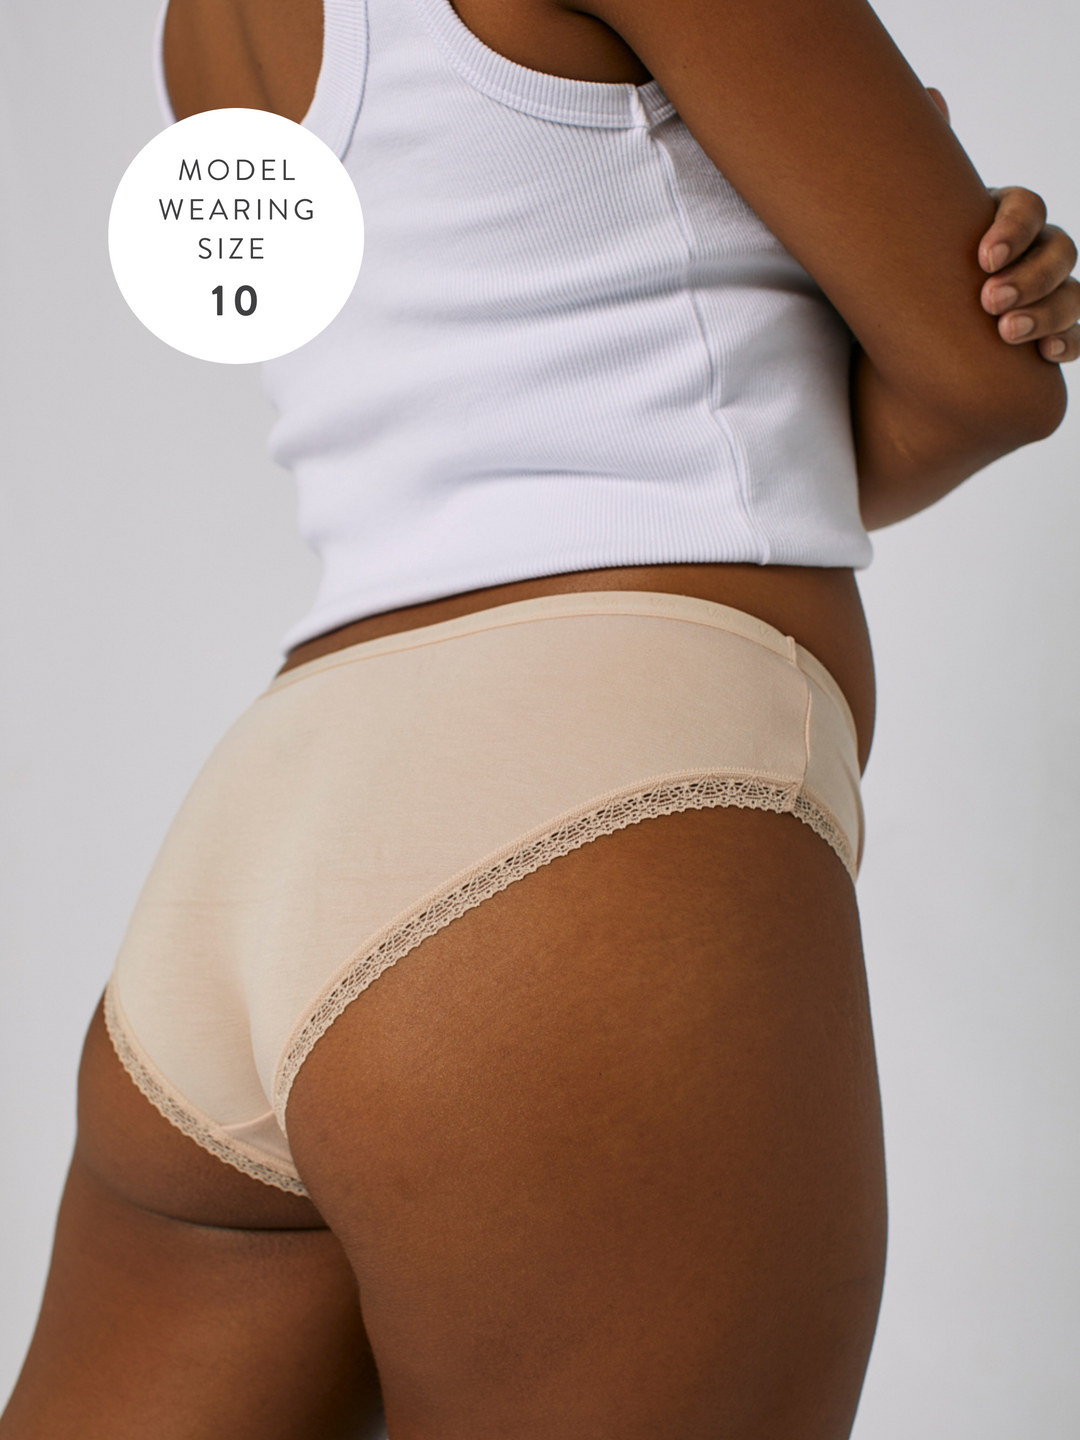 Looking for comfortable and affordable boyleg panties? With prices starting  from just R35, you can stock up on your favorite styles and